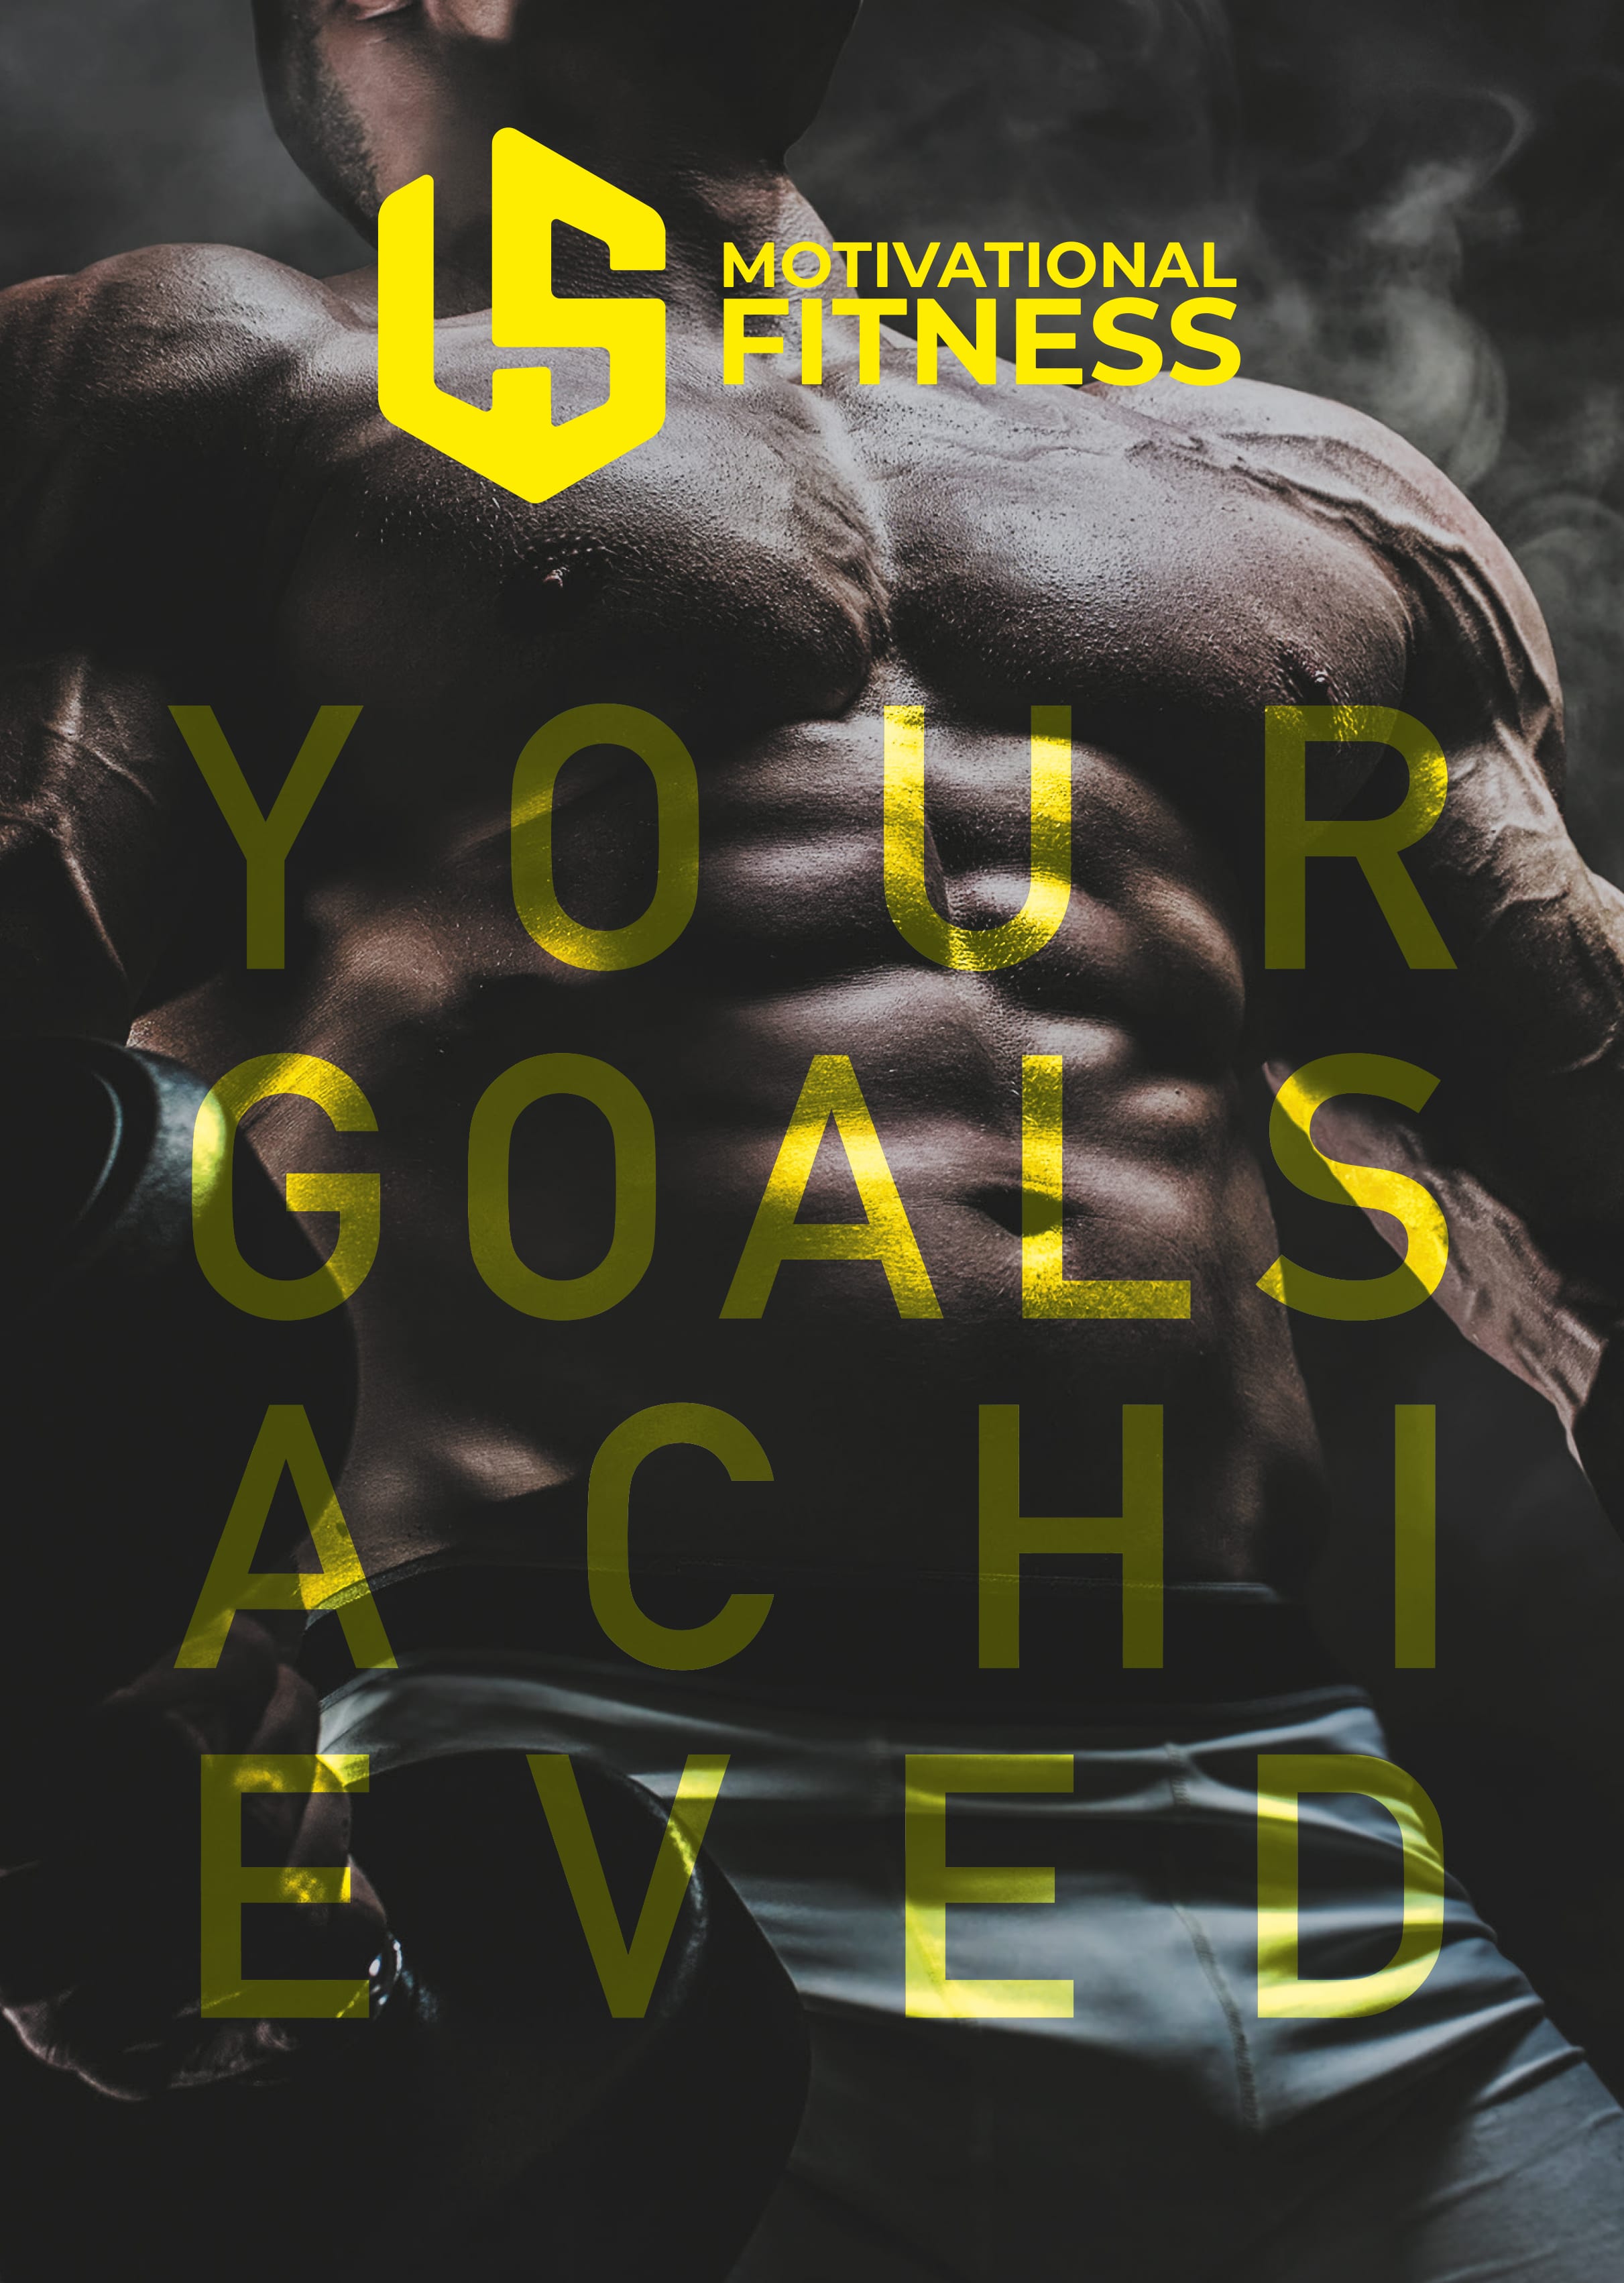 ls motivational fitness posters posters 2